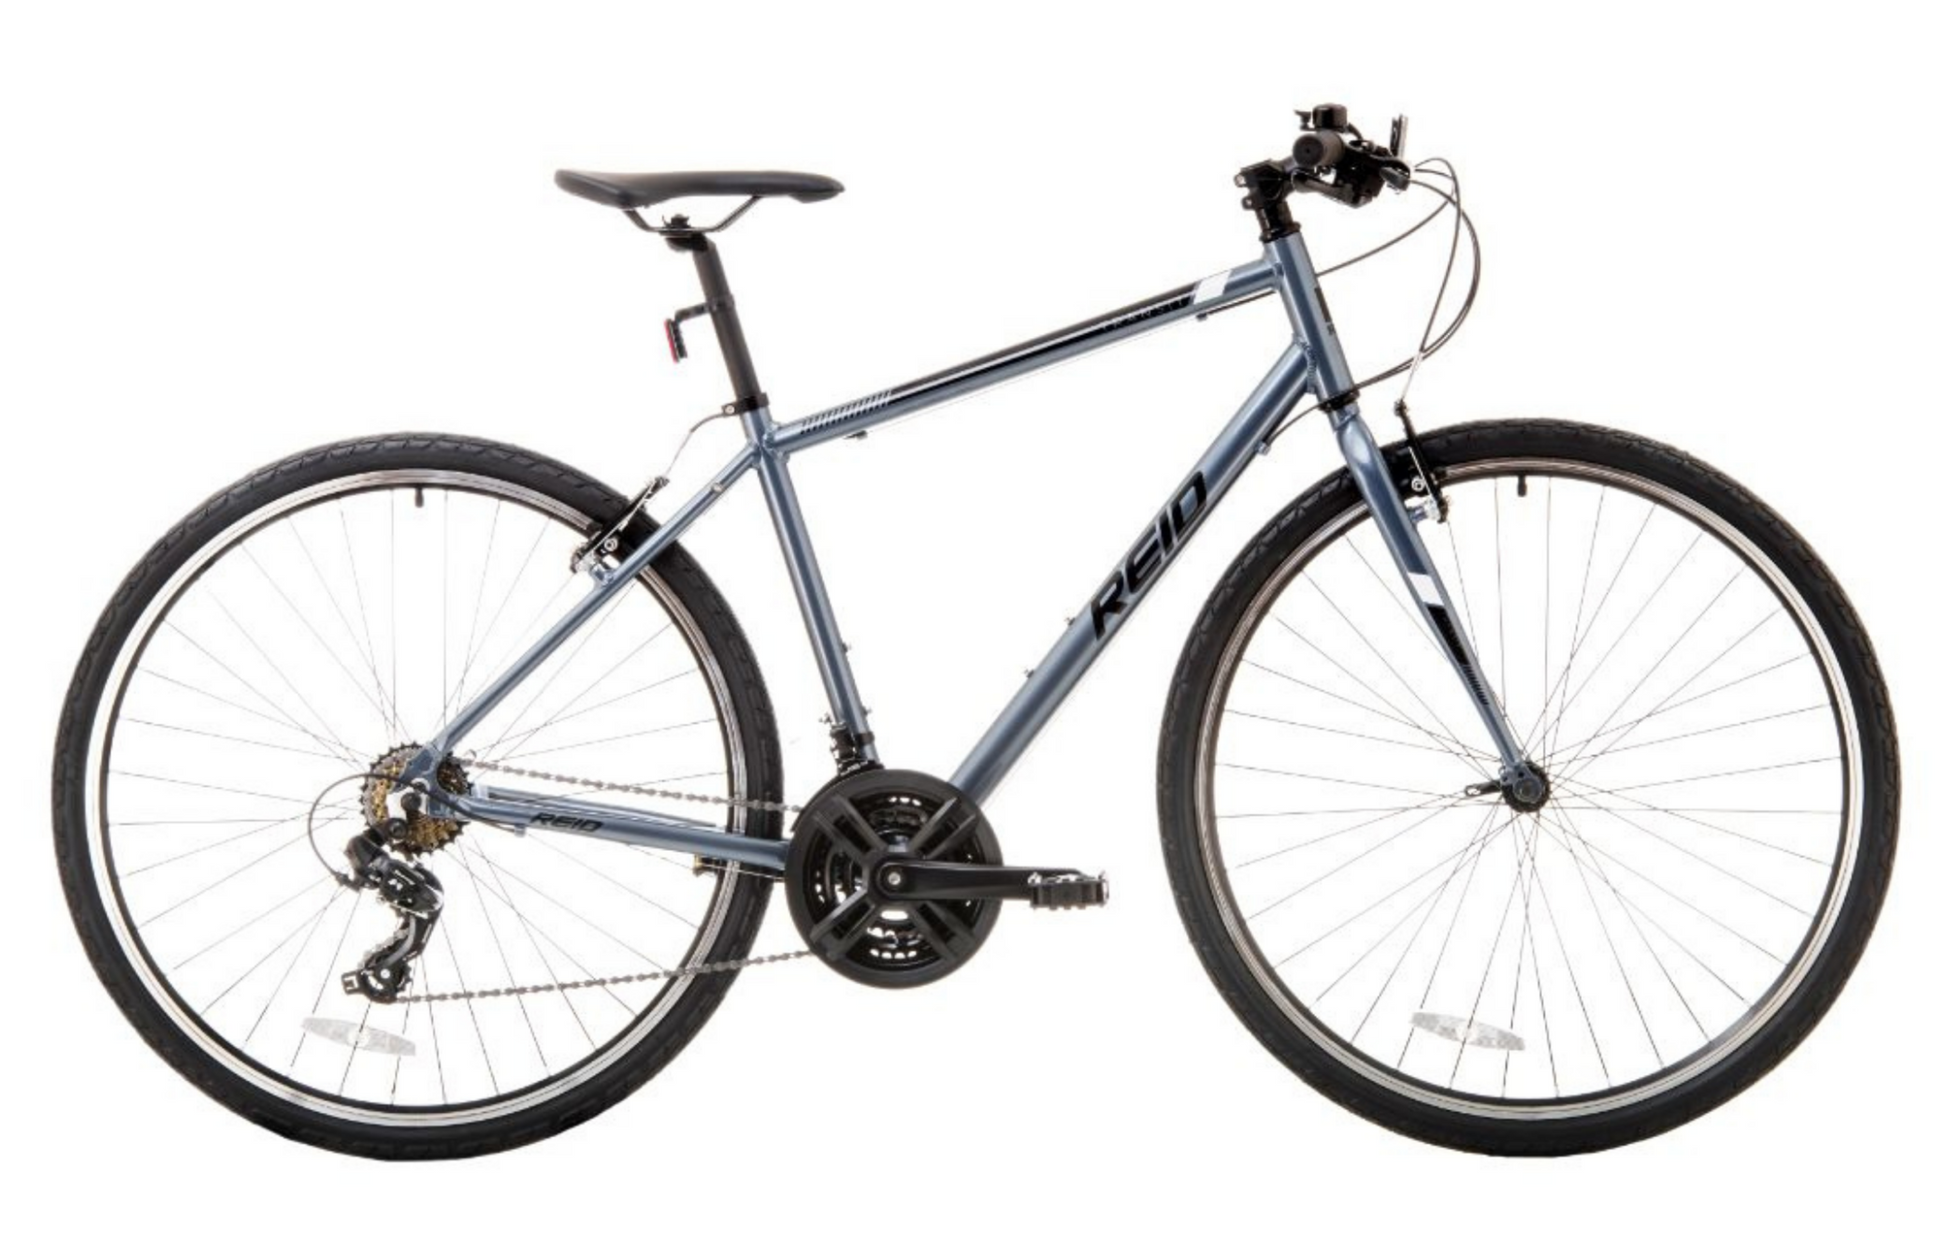 Transit Hybrid Commuter Bike in Grey with Shimano 7-speed gearing from Reid Cycles Australia